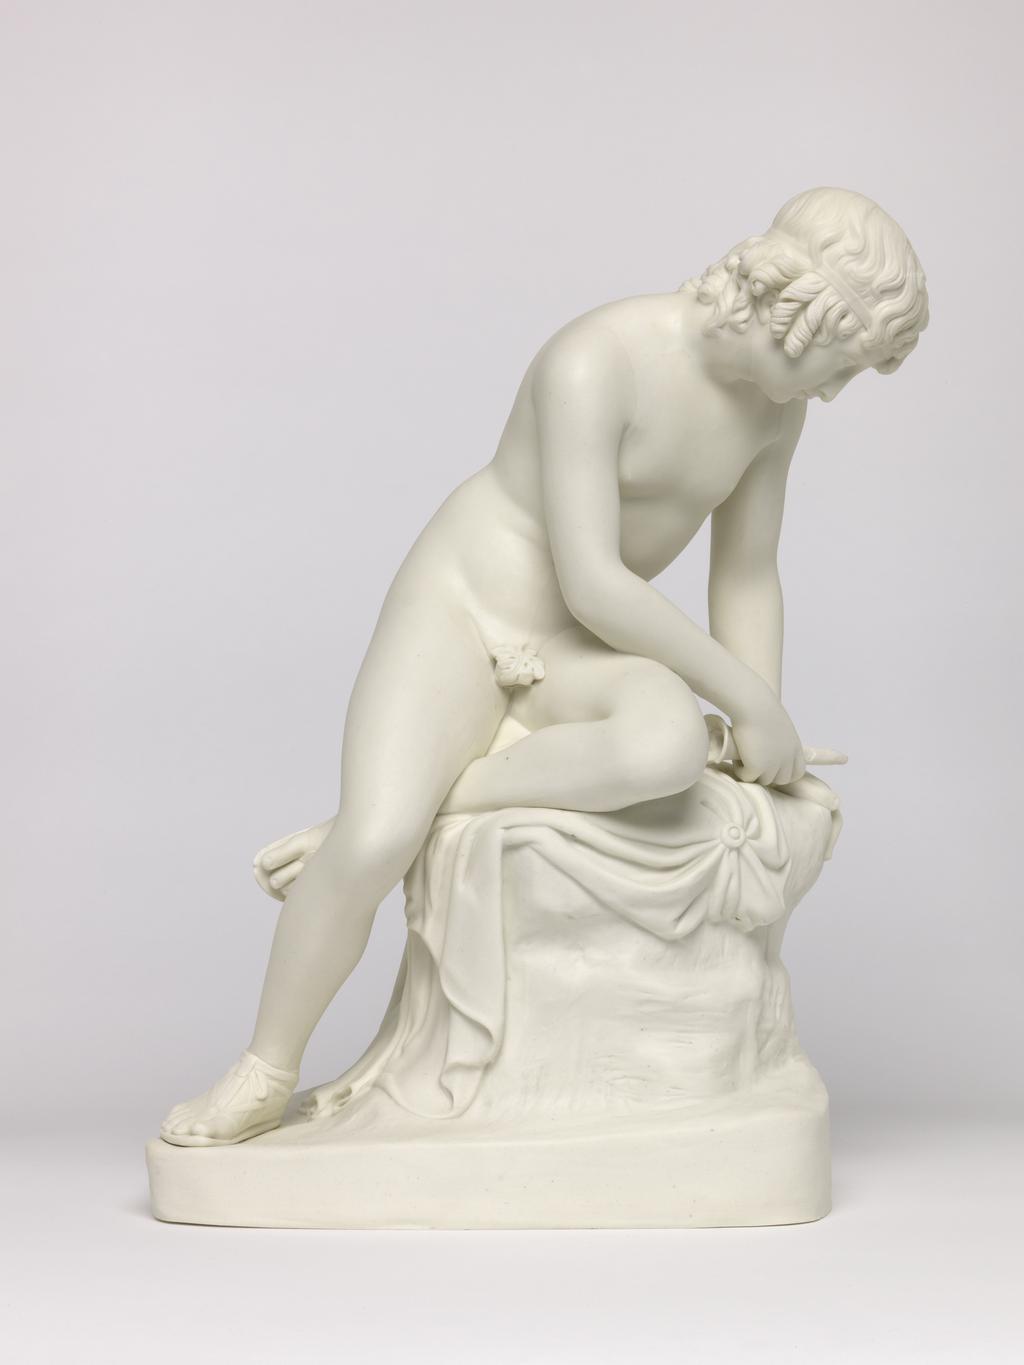 An image of Figure. Narcissus. Copeland, England, Staffordshire, Stoke-on-Trent. Stephens, E. B., modeller (British). Gibson, John, sculptor, after (British, 1790-1866). Art Union of London, distributor. Inscription: Maker's name; marked; NARCISSUS BY GIBSON R.A. modelled by EB STEPHENS and executed in STATUARY PORCELAIN BY COPELAND & GARRETT FOR THE UNION OF LONDON 1846. Parian (porcelain), slip-cast, height 30.9 cm, length 24.1 cm, width 12.8 cm, length, base, 12.8 cm, width, base, 20.9 cm, 1846. Acquisition Credit: Accepted by H. M. Government in lieu of Inheritance Tax from the estate of G. D. V. Glynn, and allocated to the Fitzwilliam Museum.